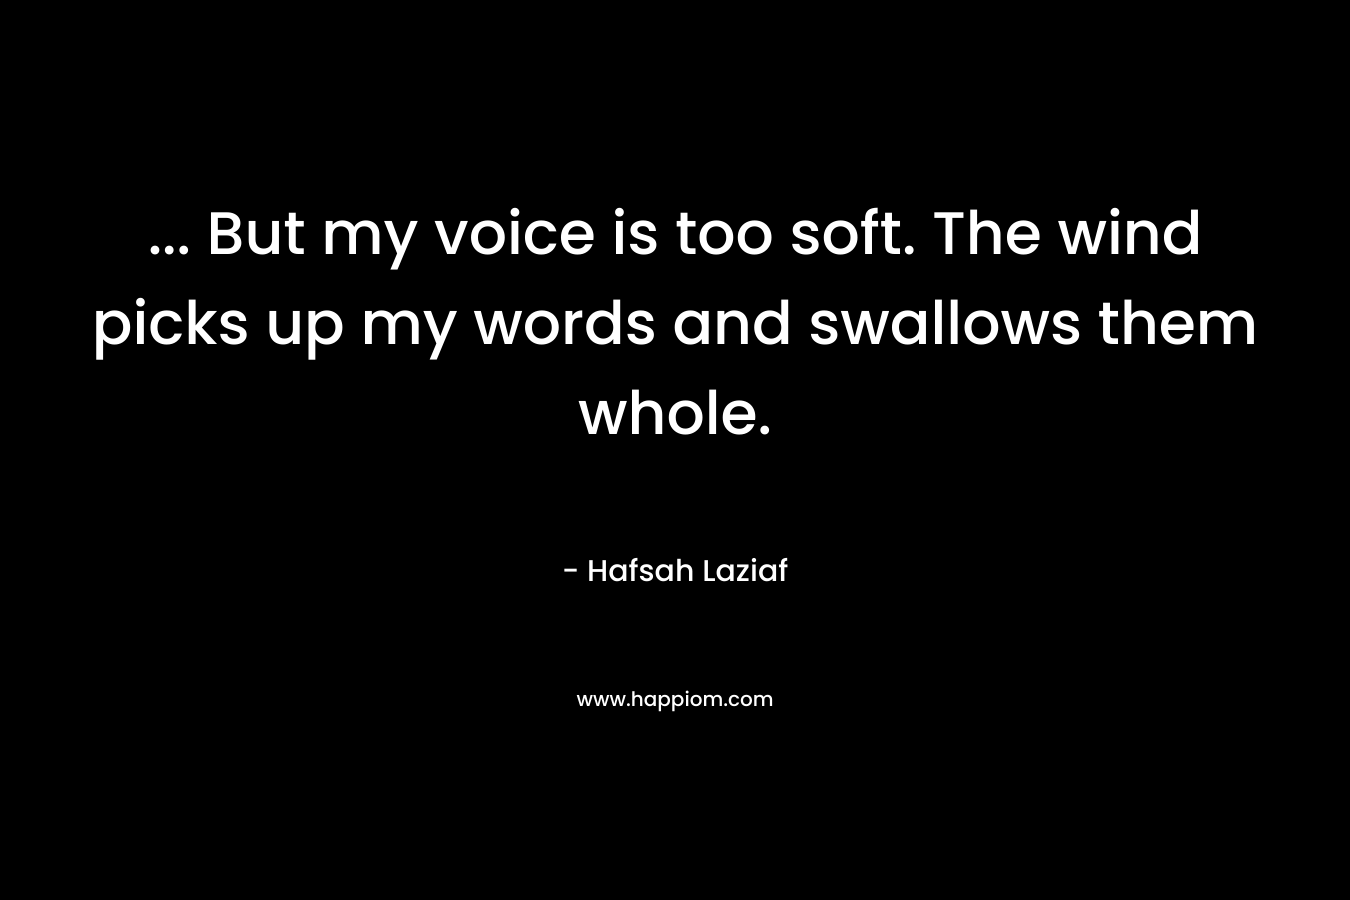 … But my voice is too soft. The wind picks up my words and swallows them whole. – Hafsah Laziaf